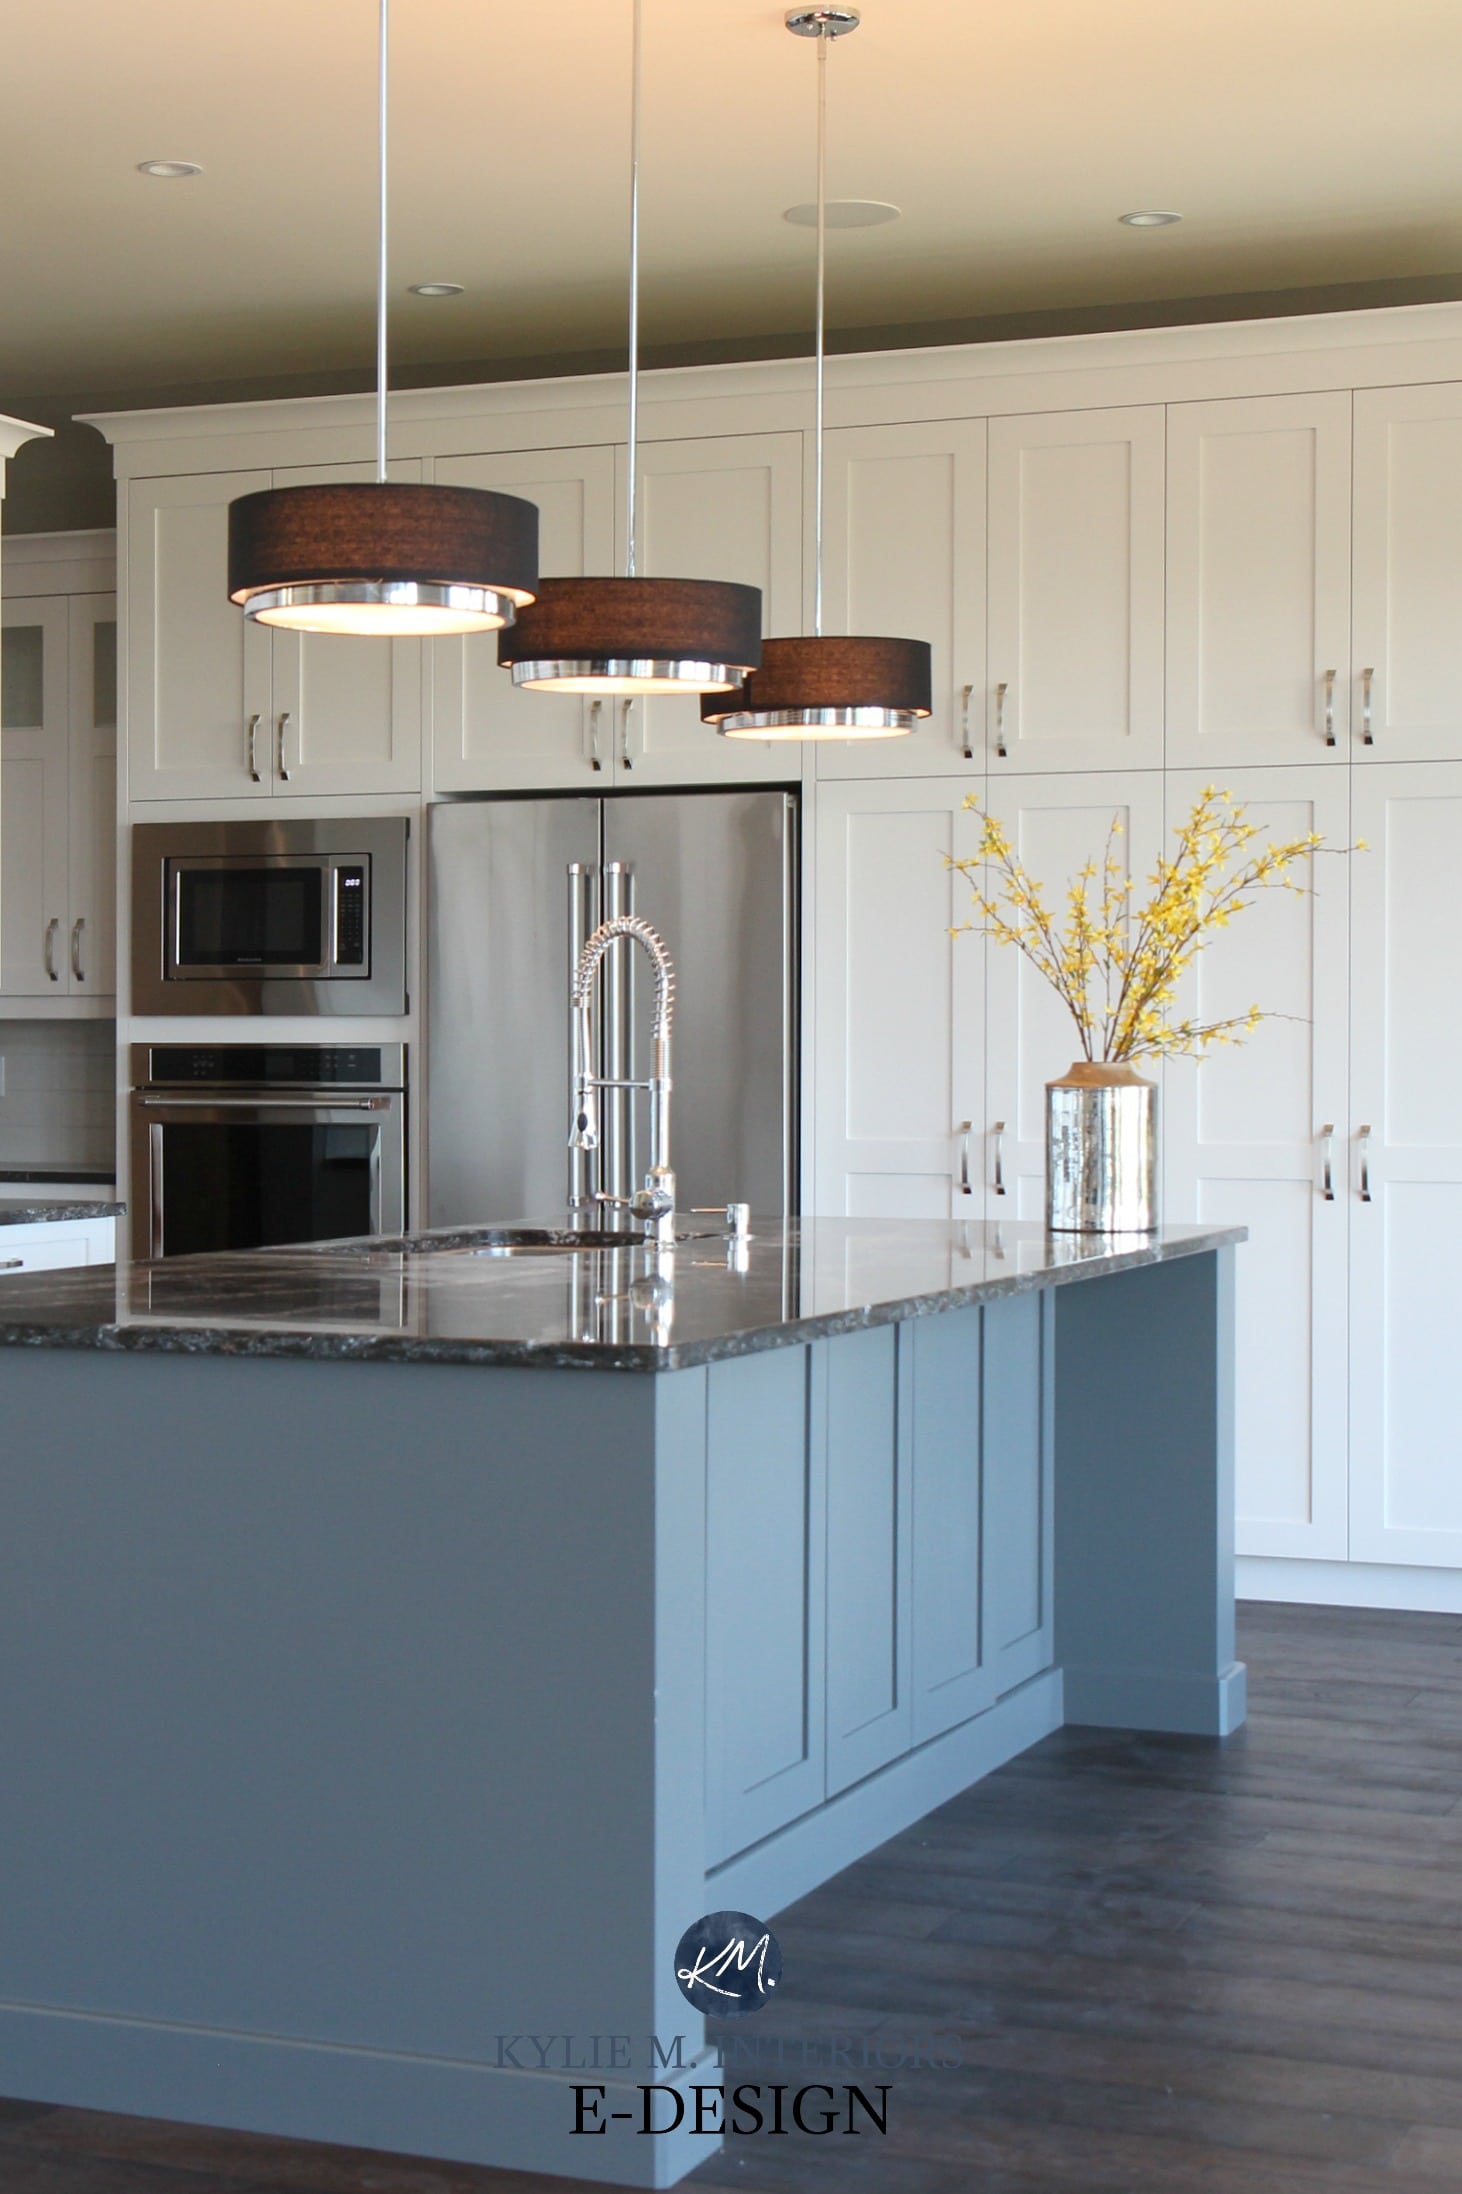 Best white paint colour. Walls or cabinets.White kitchen, gray painted island. Cambria quartz countertop black, dark wood flooring, pendant lights, modern. Kylie M Interiors Edesign. Pure White Sherwin Williams cabinets